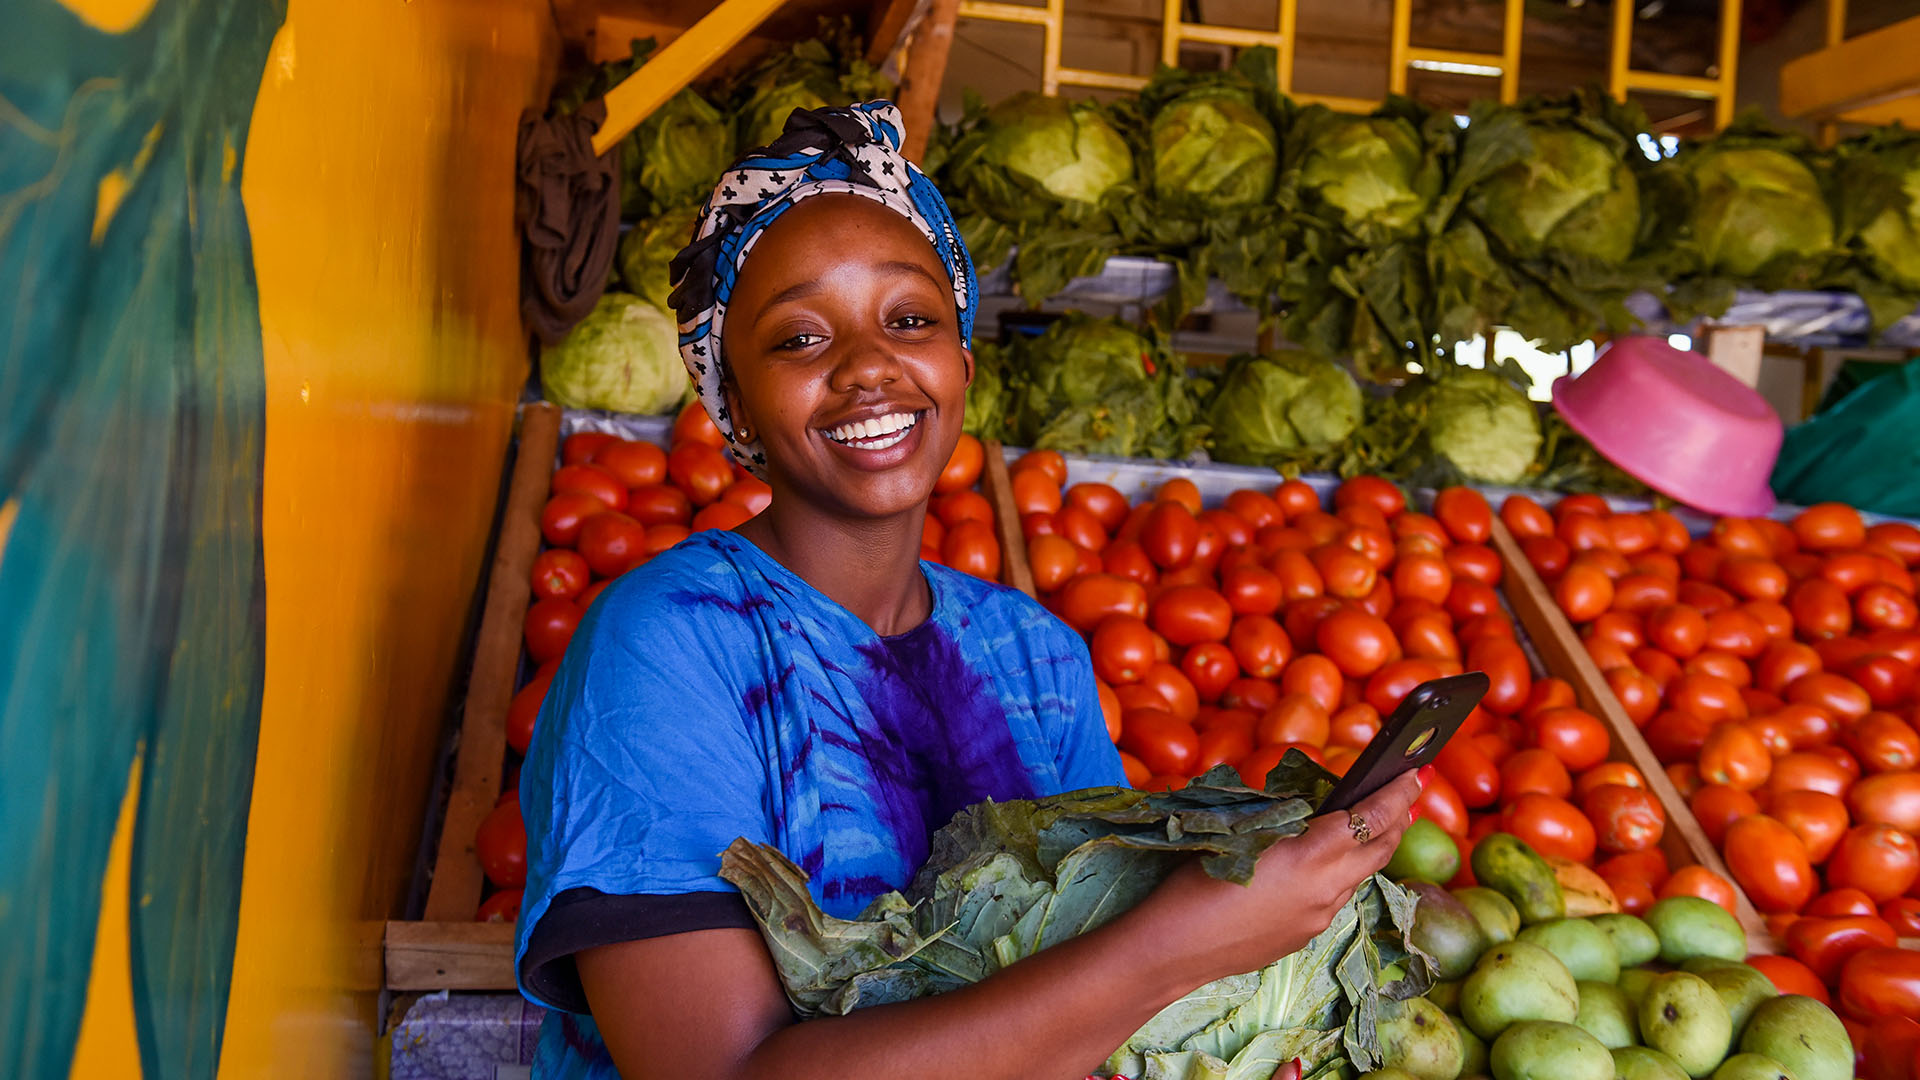 A woman smiles after receiving payment for groceries in Kiambu, Kenya